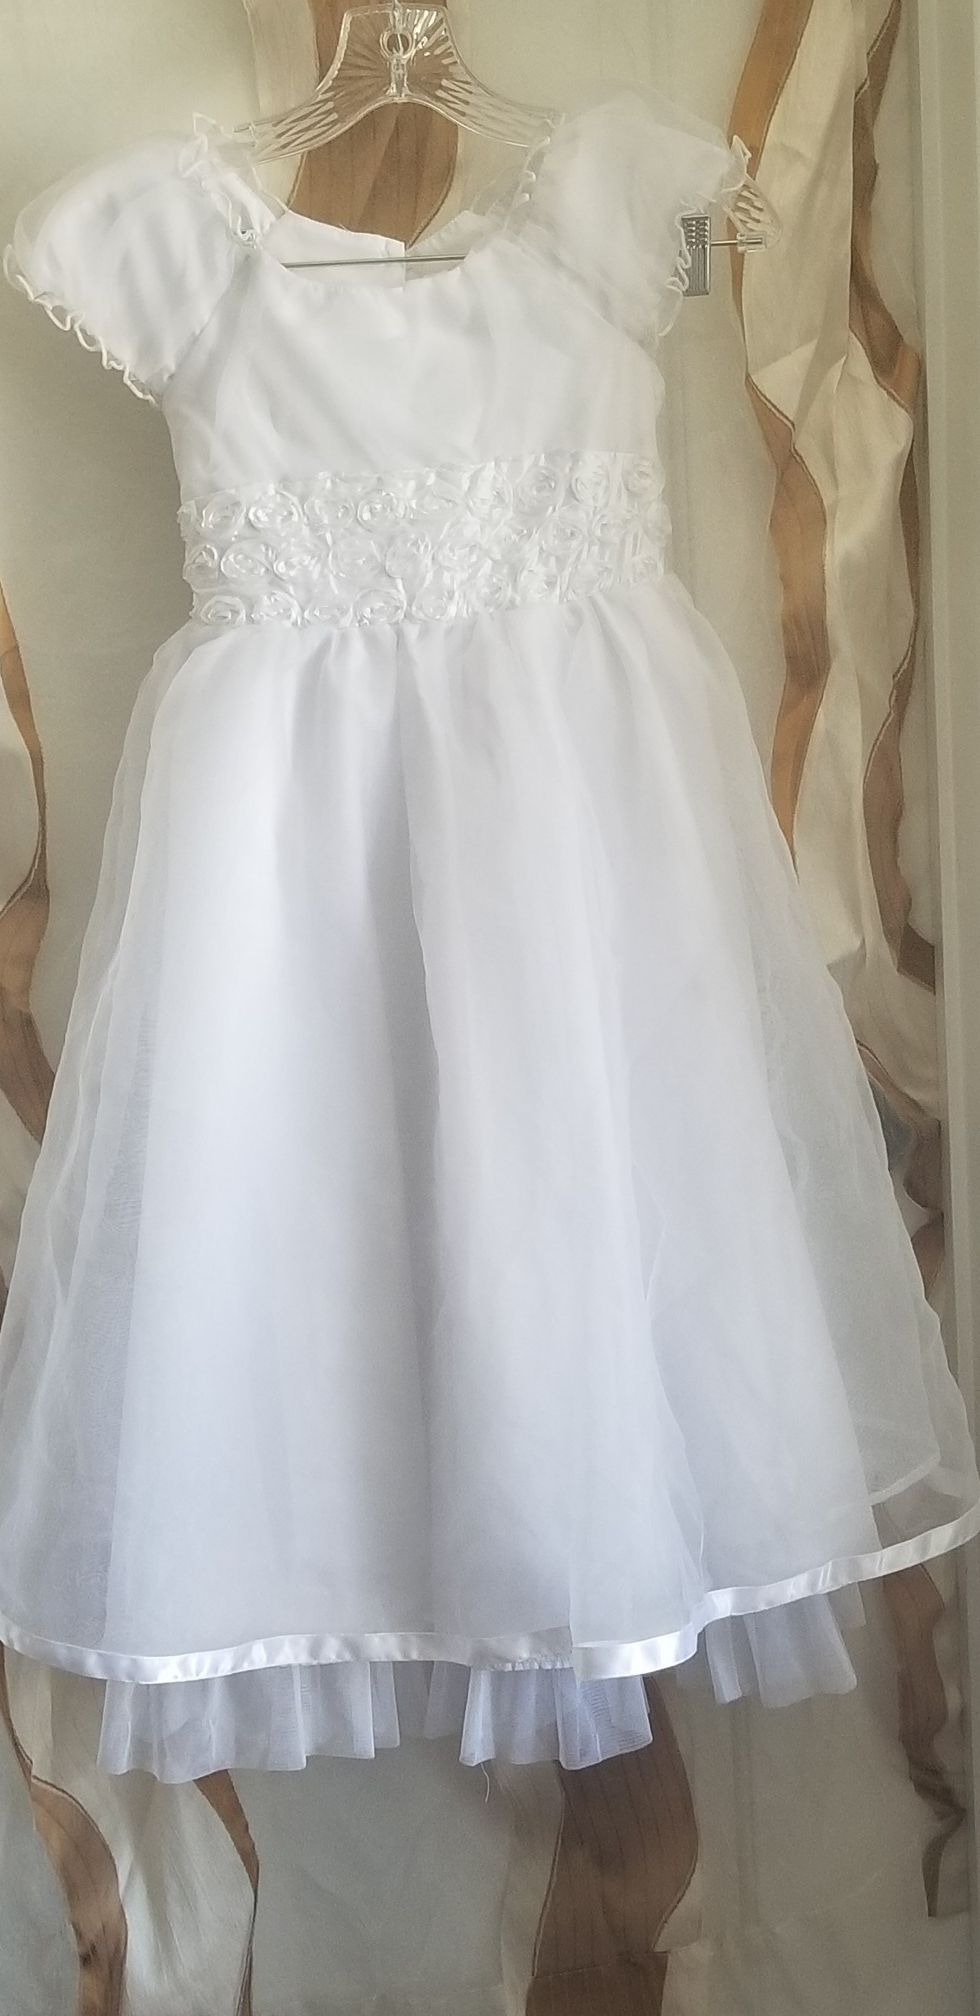 It's Not Too Late, Princess Pretty all white Girls dress. Size 7.